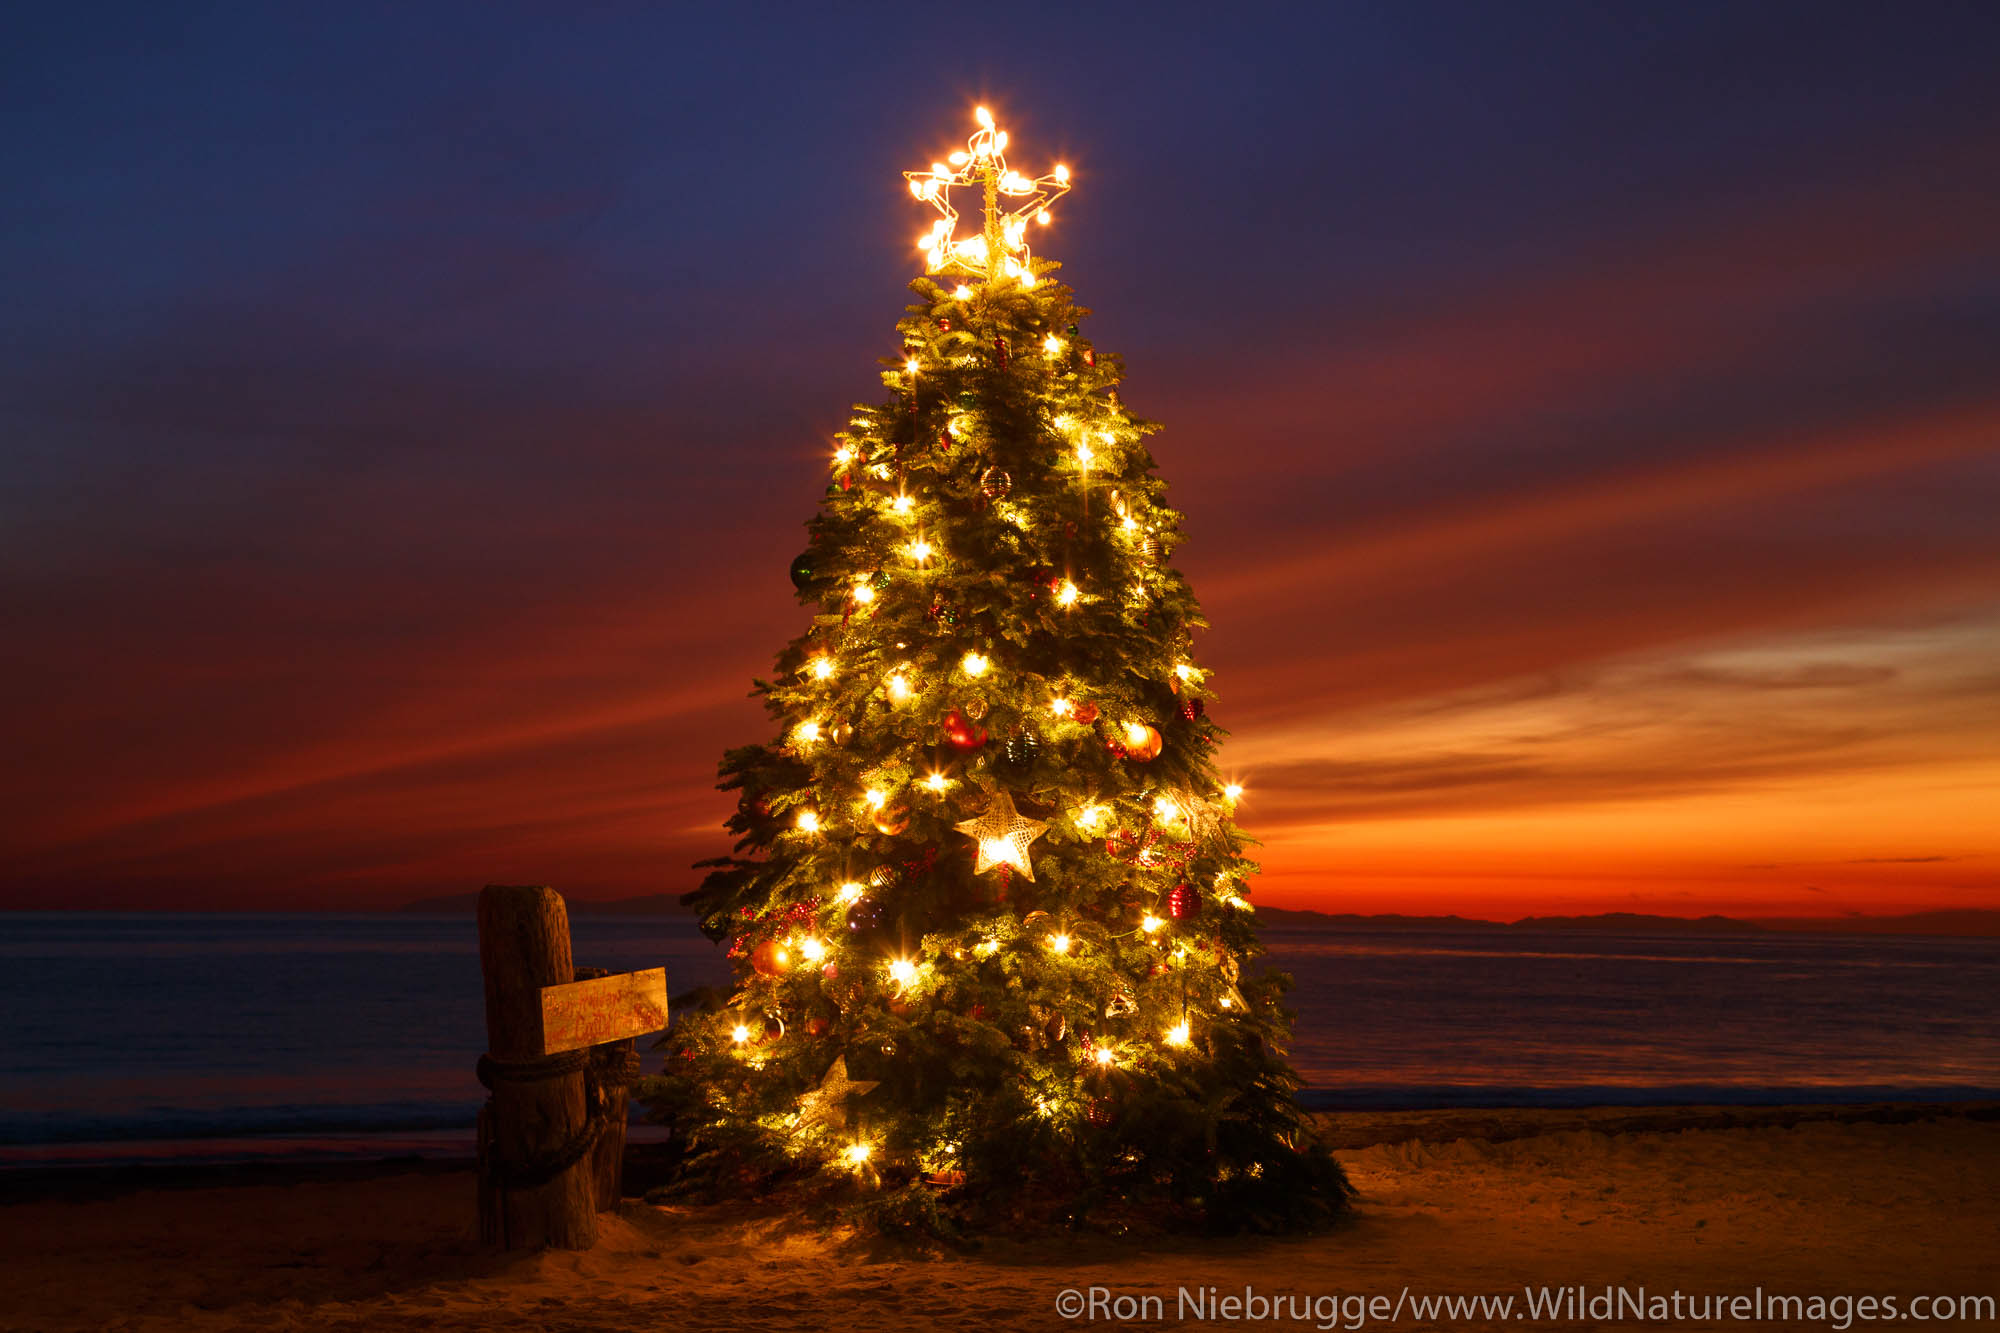 Christmas Tree at the Crystal Cove Beach Cottages, Crystal Cove State Park, Newport Beach, Orange County, California.